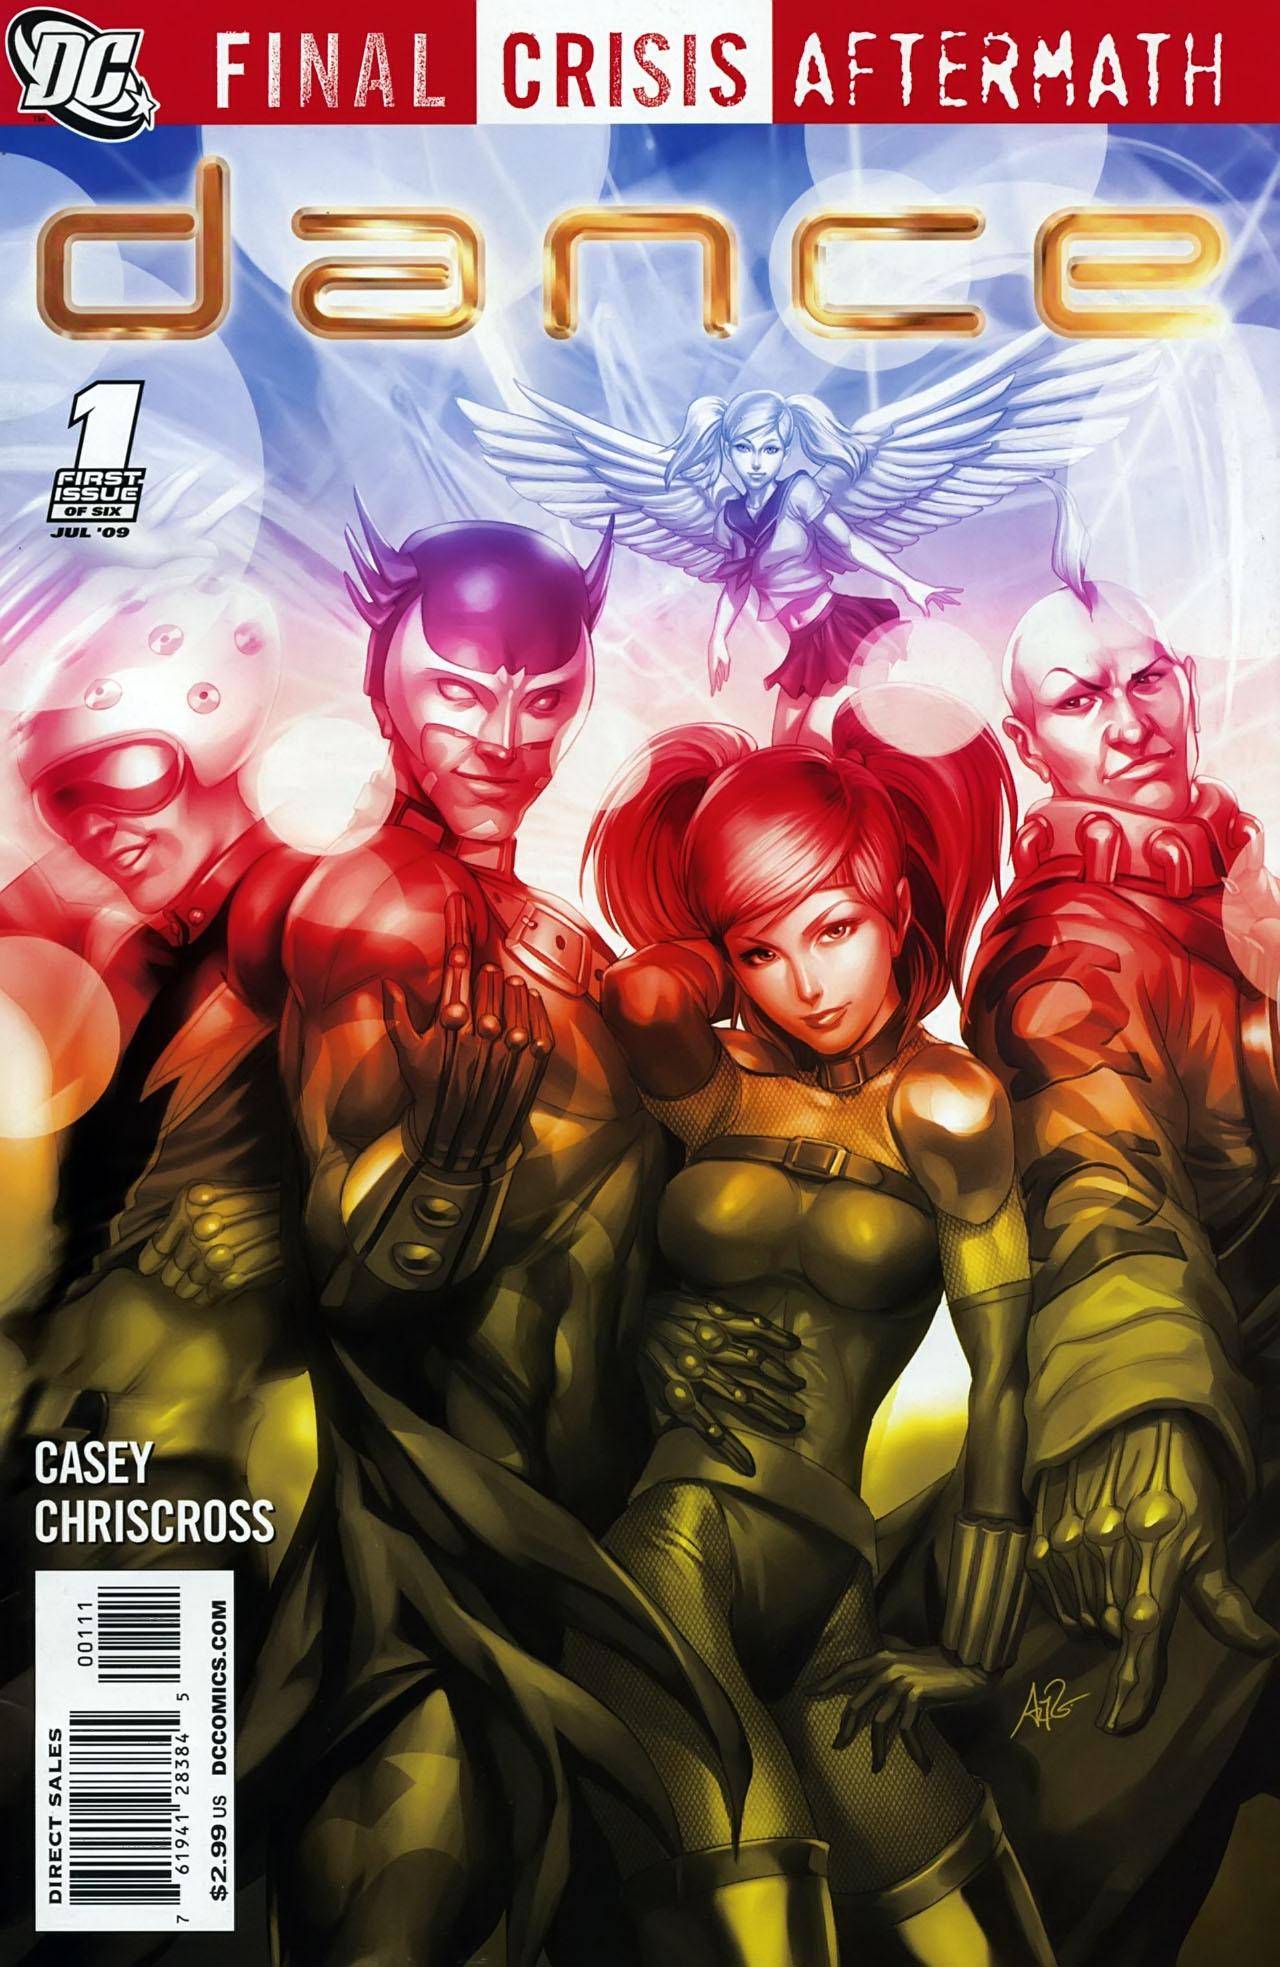 Final Crisis Aftermath - Dance 01 (of 06) (2009)